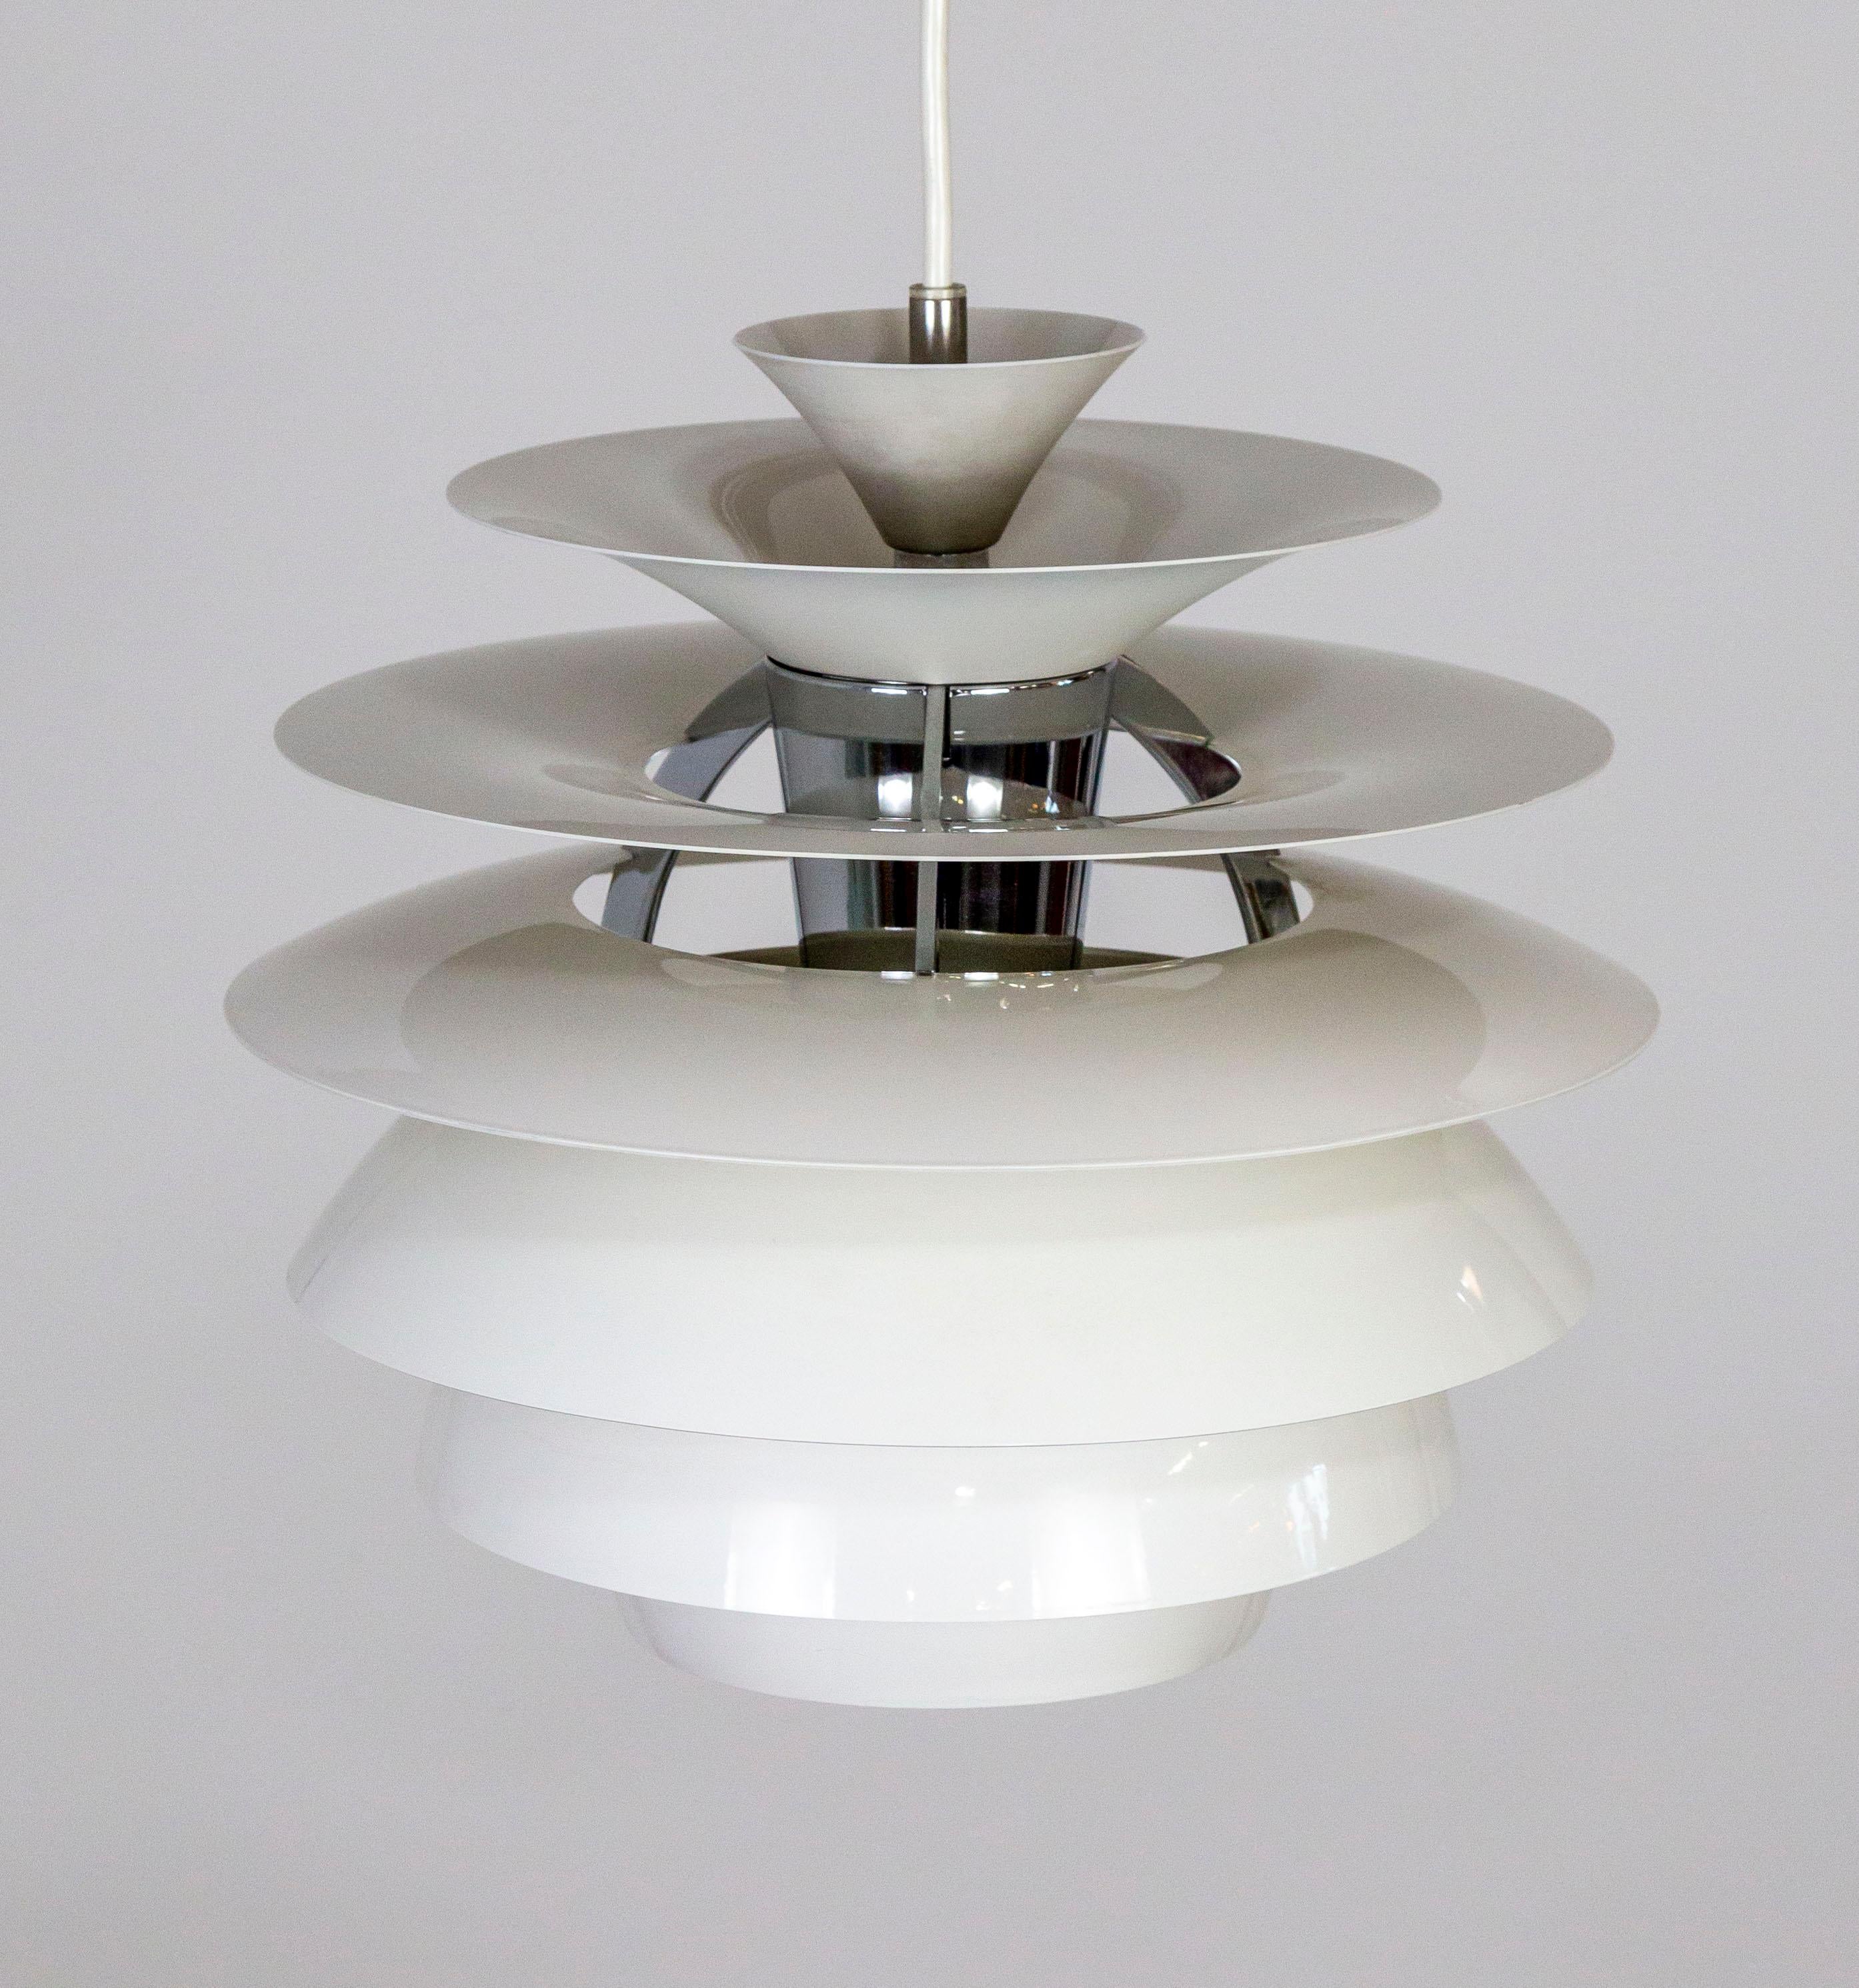 A pendant light that was originally designed in the late 1950s by Poul Henningson for Louis Poulsen in Denmark. This piece is from the relaunch in 1982. The light is composed of tiers of arcing aluminum shades around a chrome inner cylinder. The